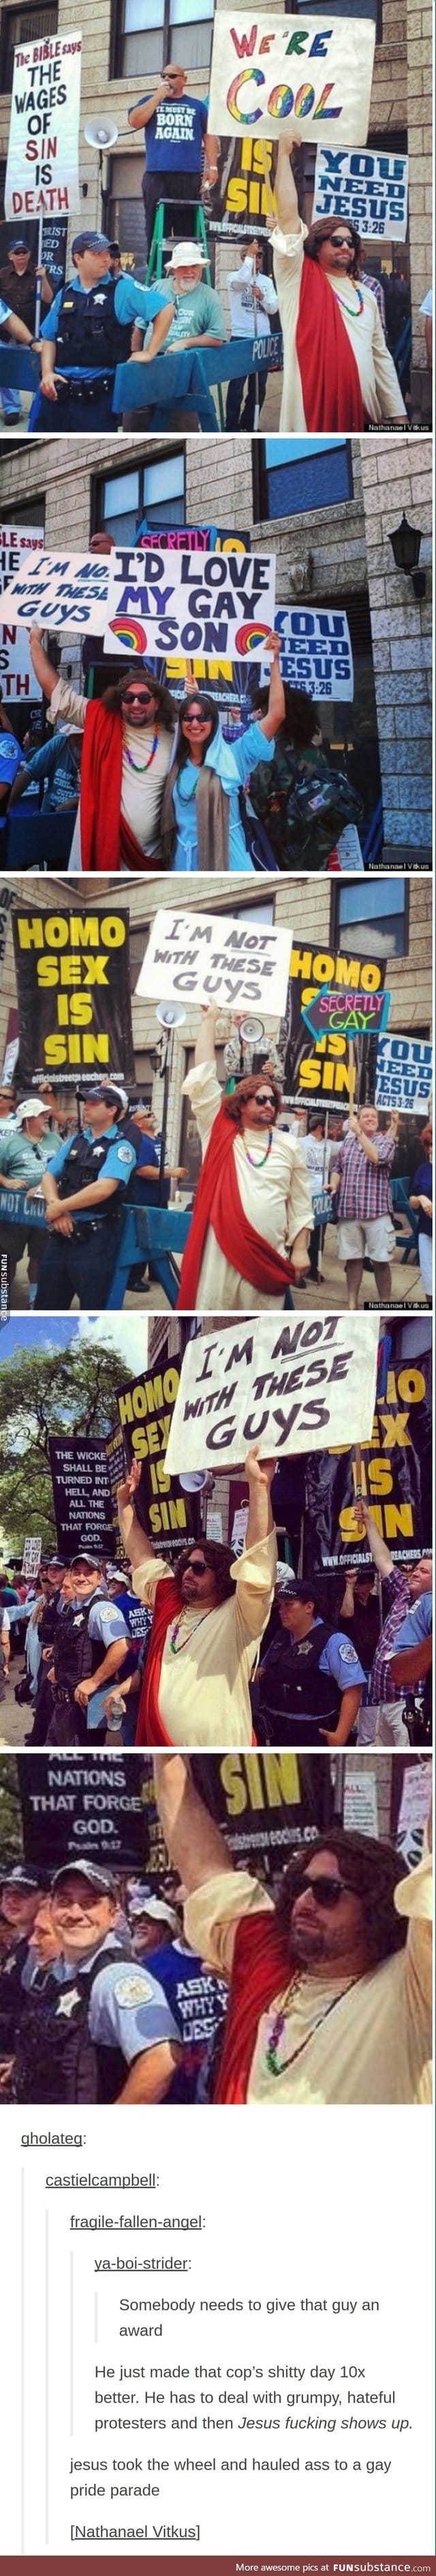 Jesus ain't a hater